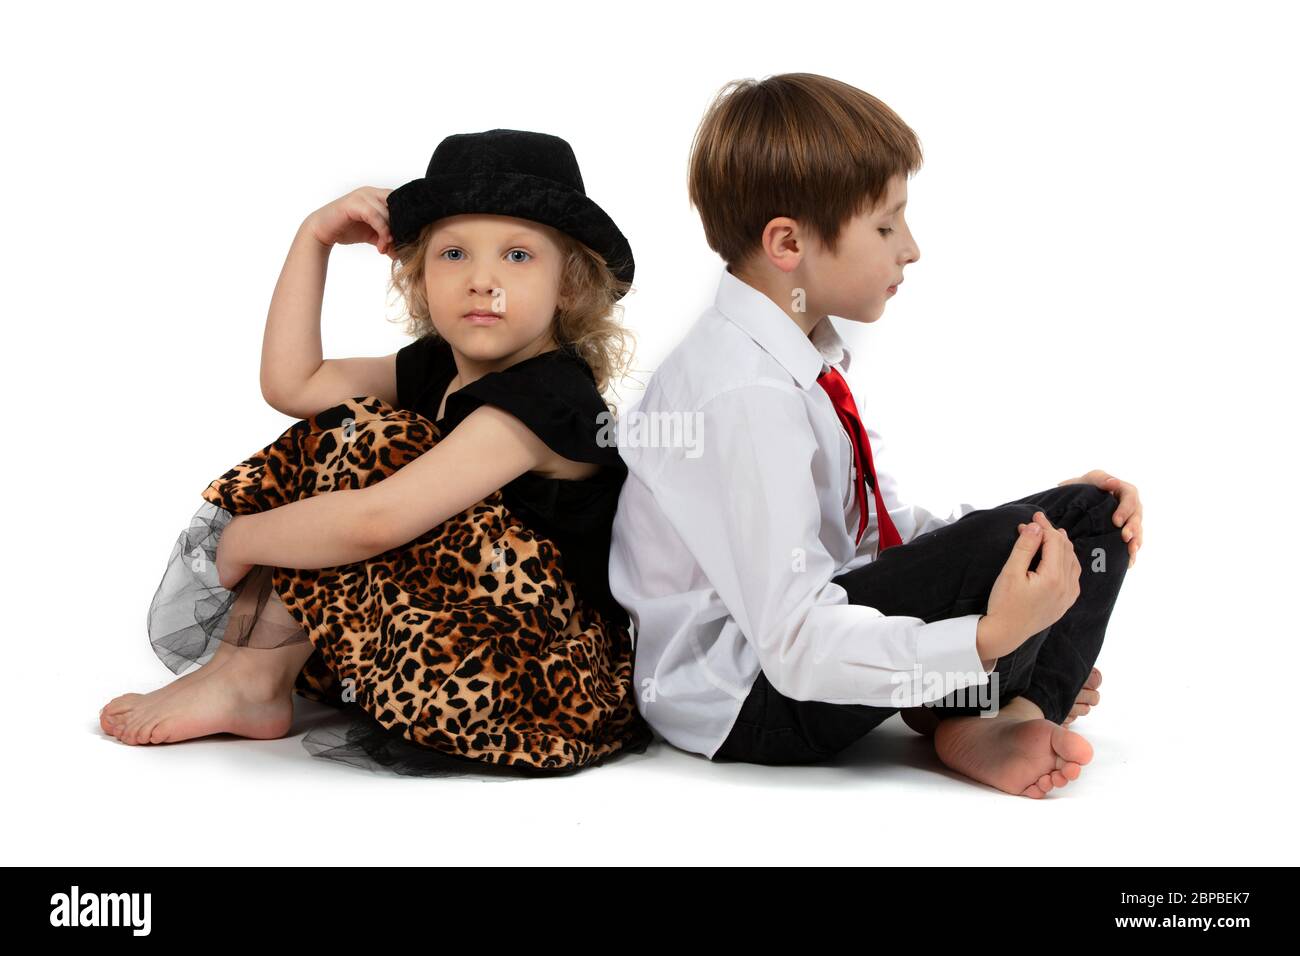 Beautiful children. Little girl and boy with their backs to each other. Funny children couple. Brother and sister. Valentines day and children Stock Photo